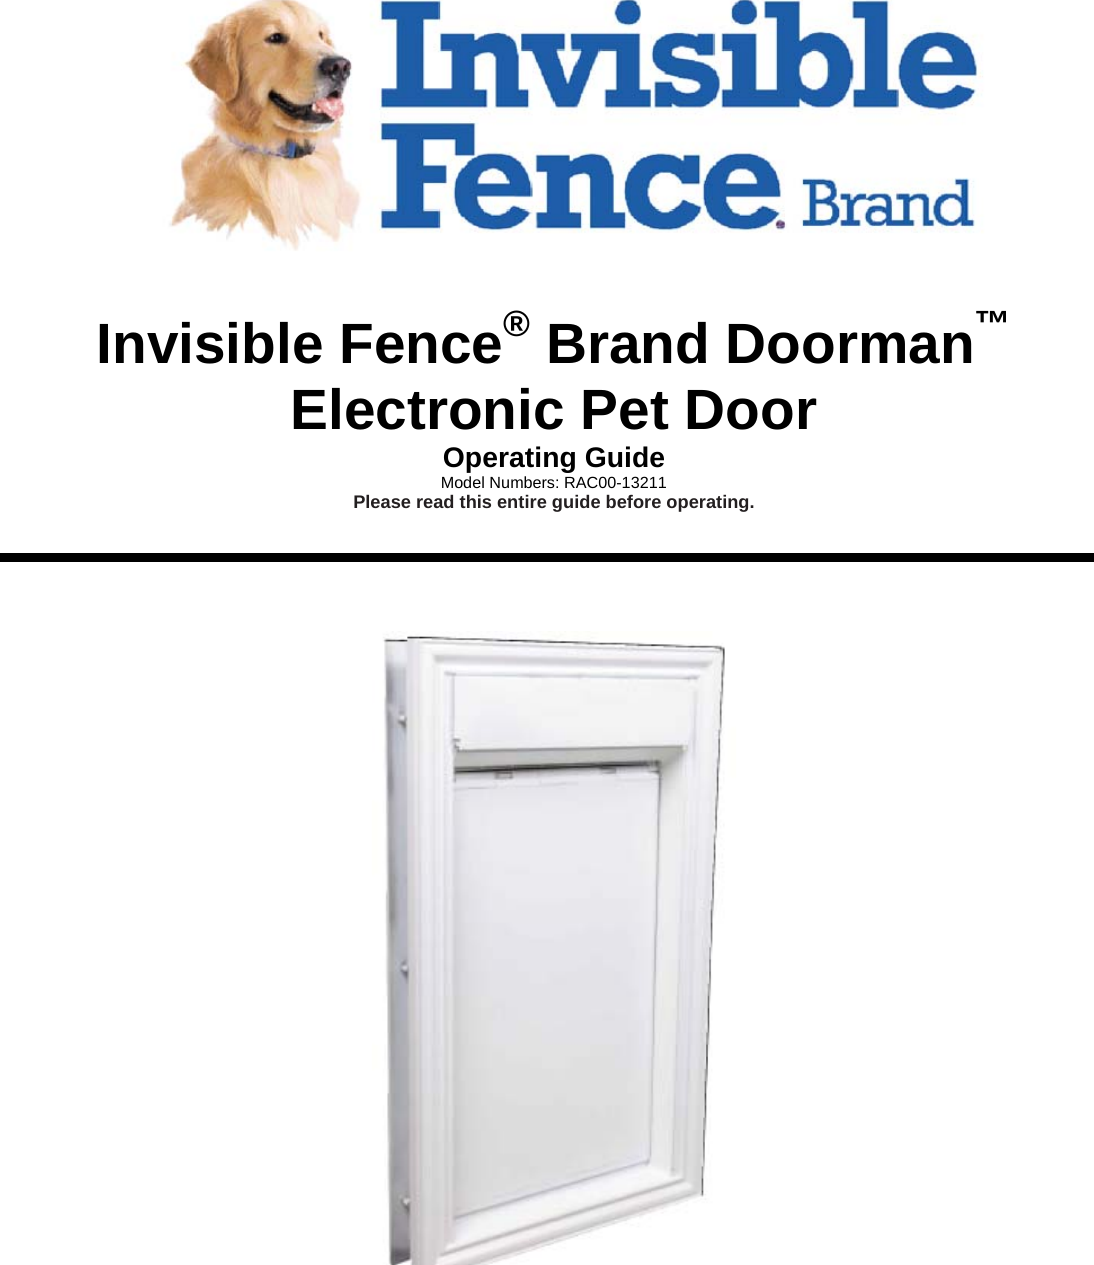          Invisible Fence® Brand Doorman™ Electronic Pet Door  Operating Guide Model Numbers: RAC00-13211 Please read this entire guide before operating.      